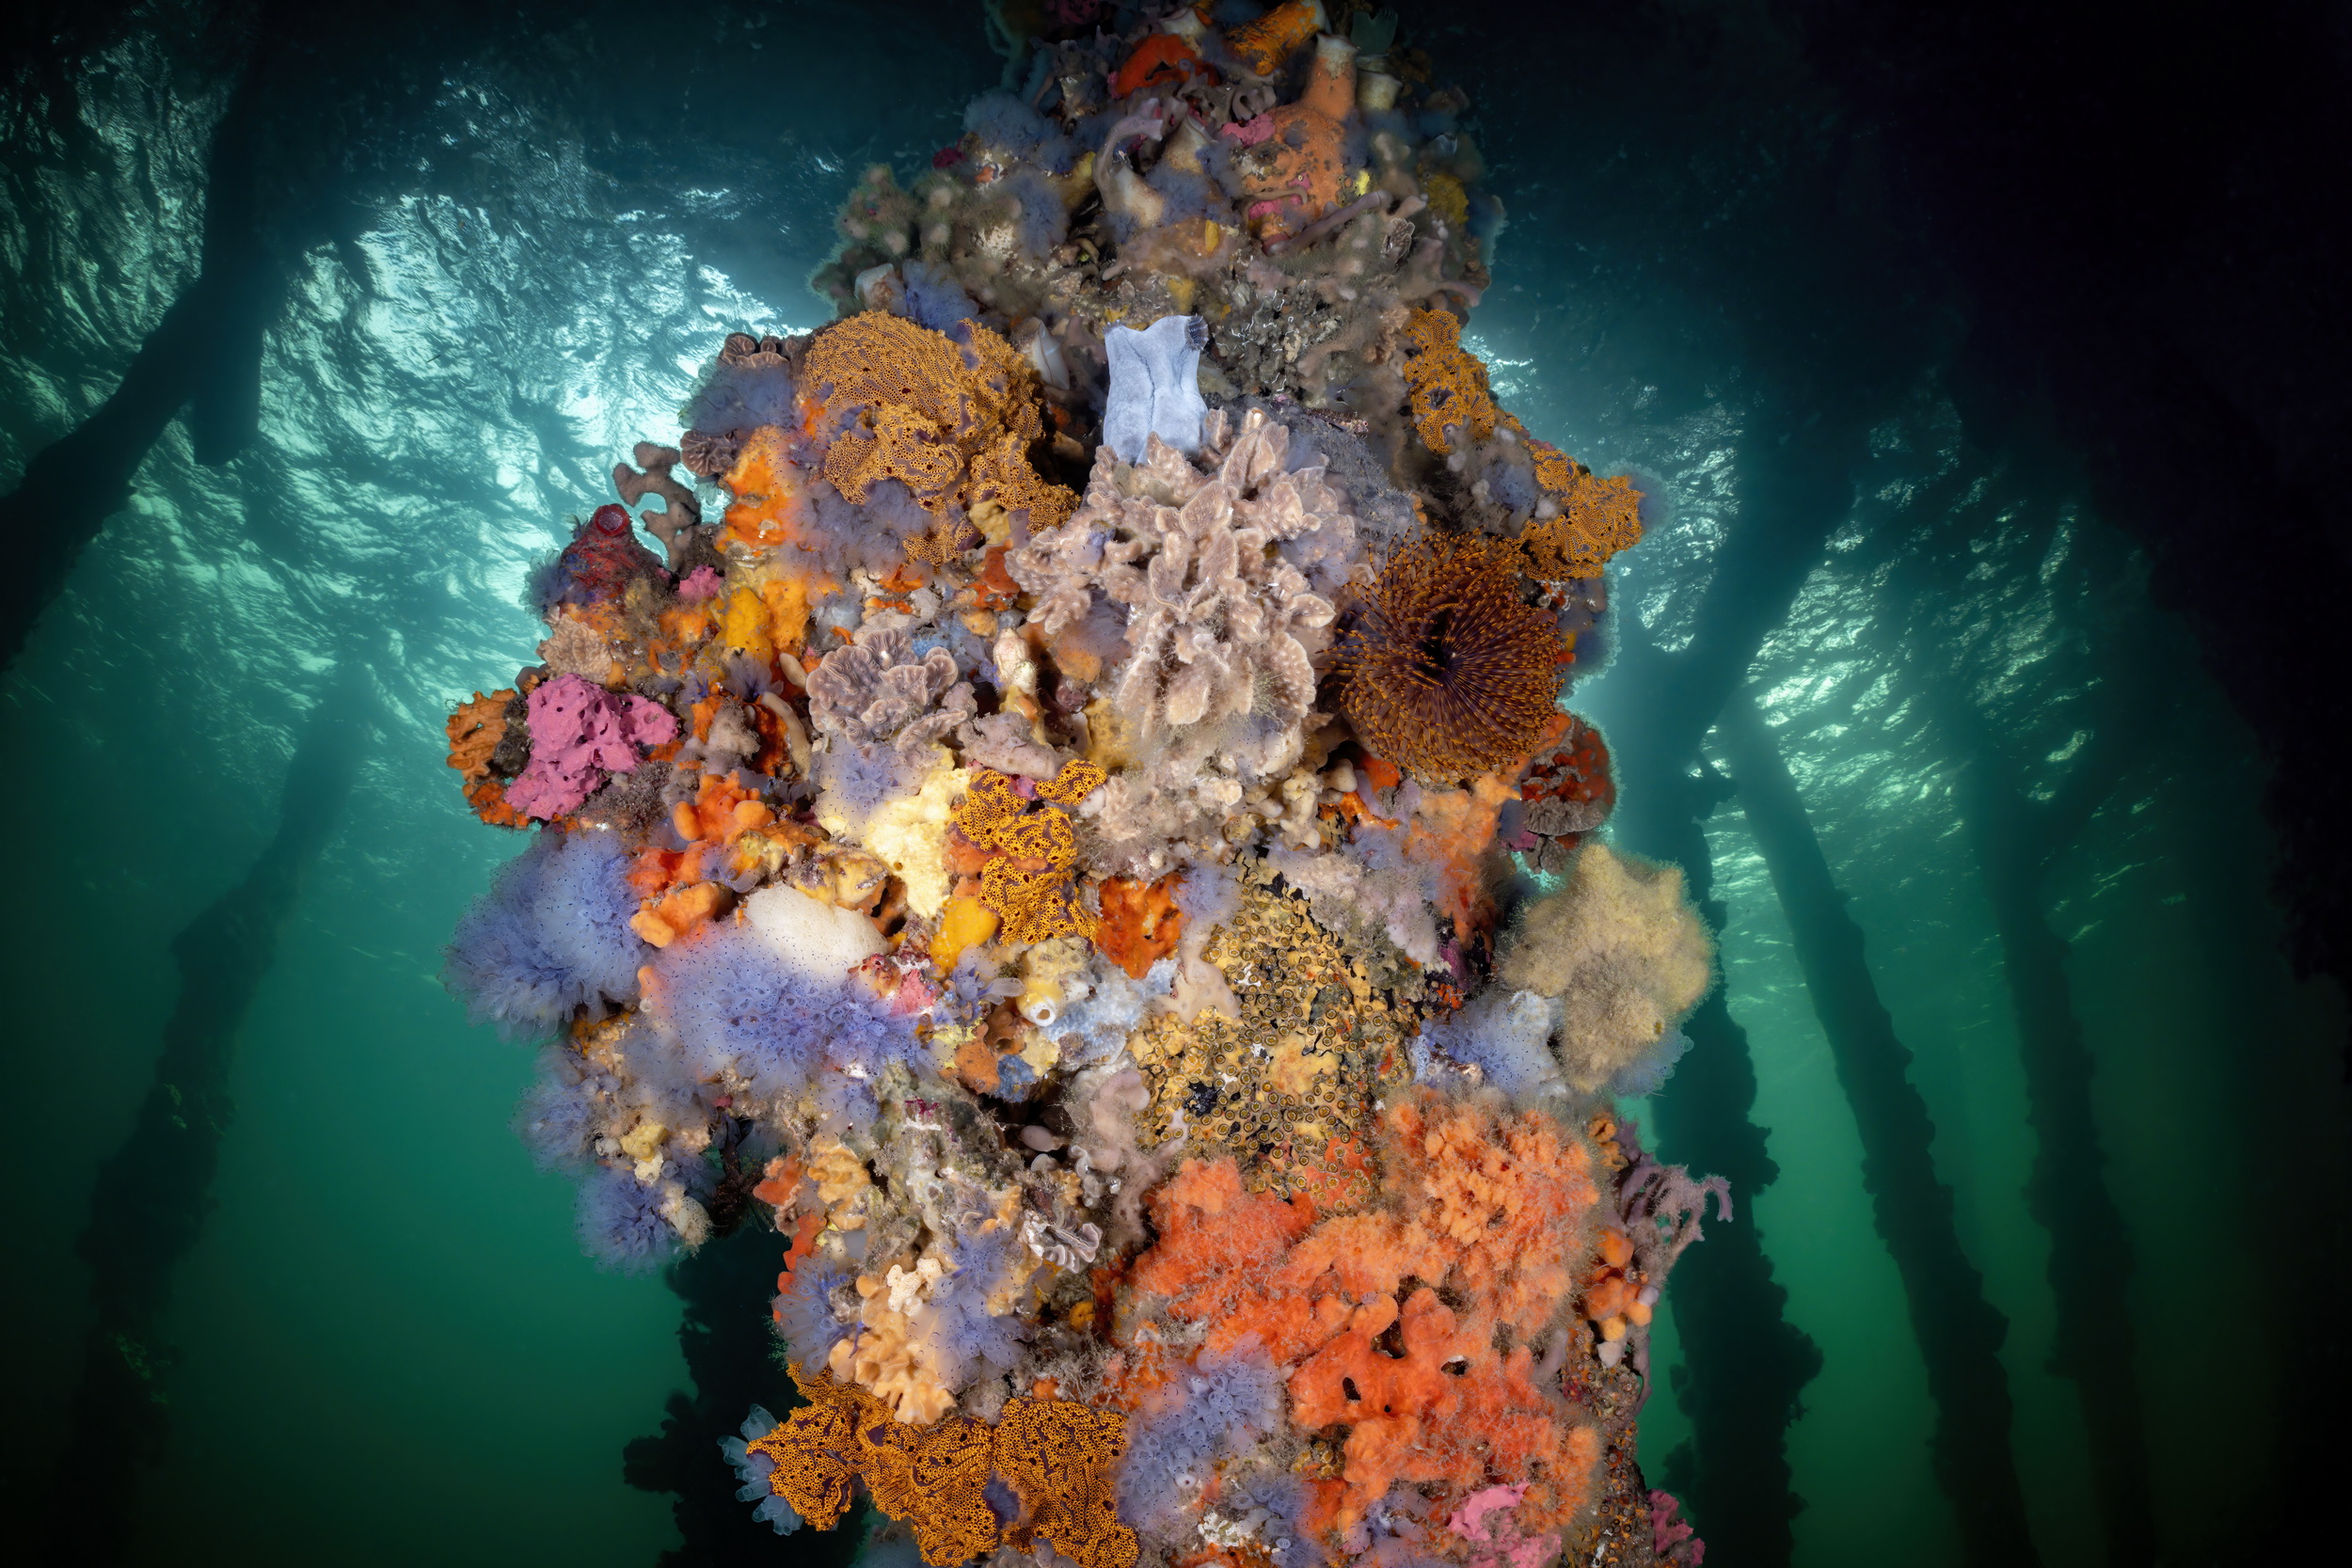 Sponges, tunicates and invertebrate growth on pylon of Edithburgh Jetty. Photo by Don Silcock.